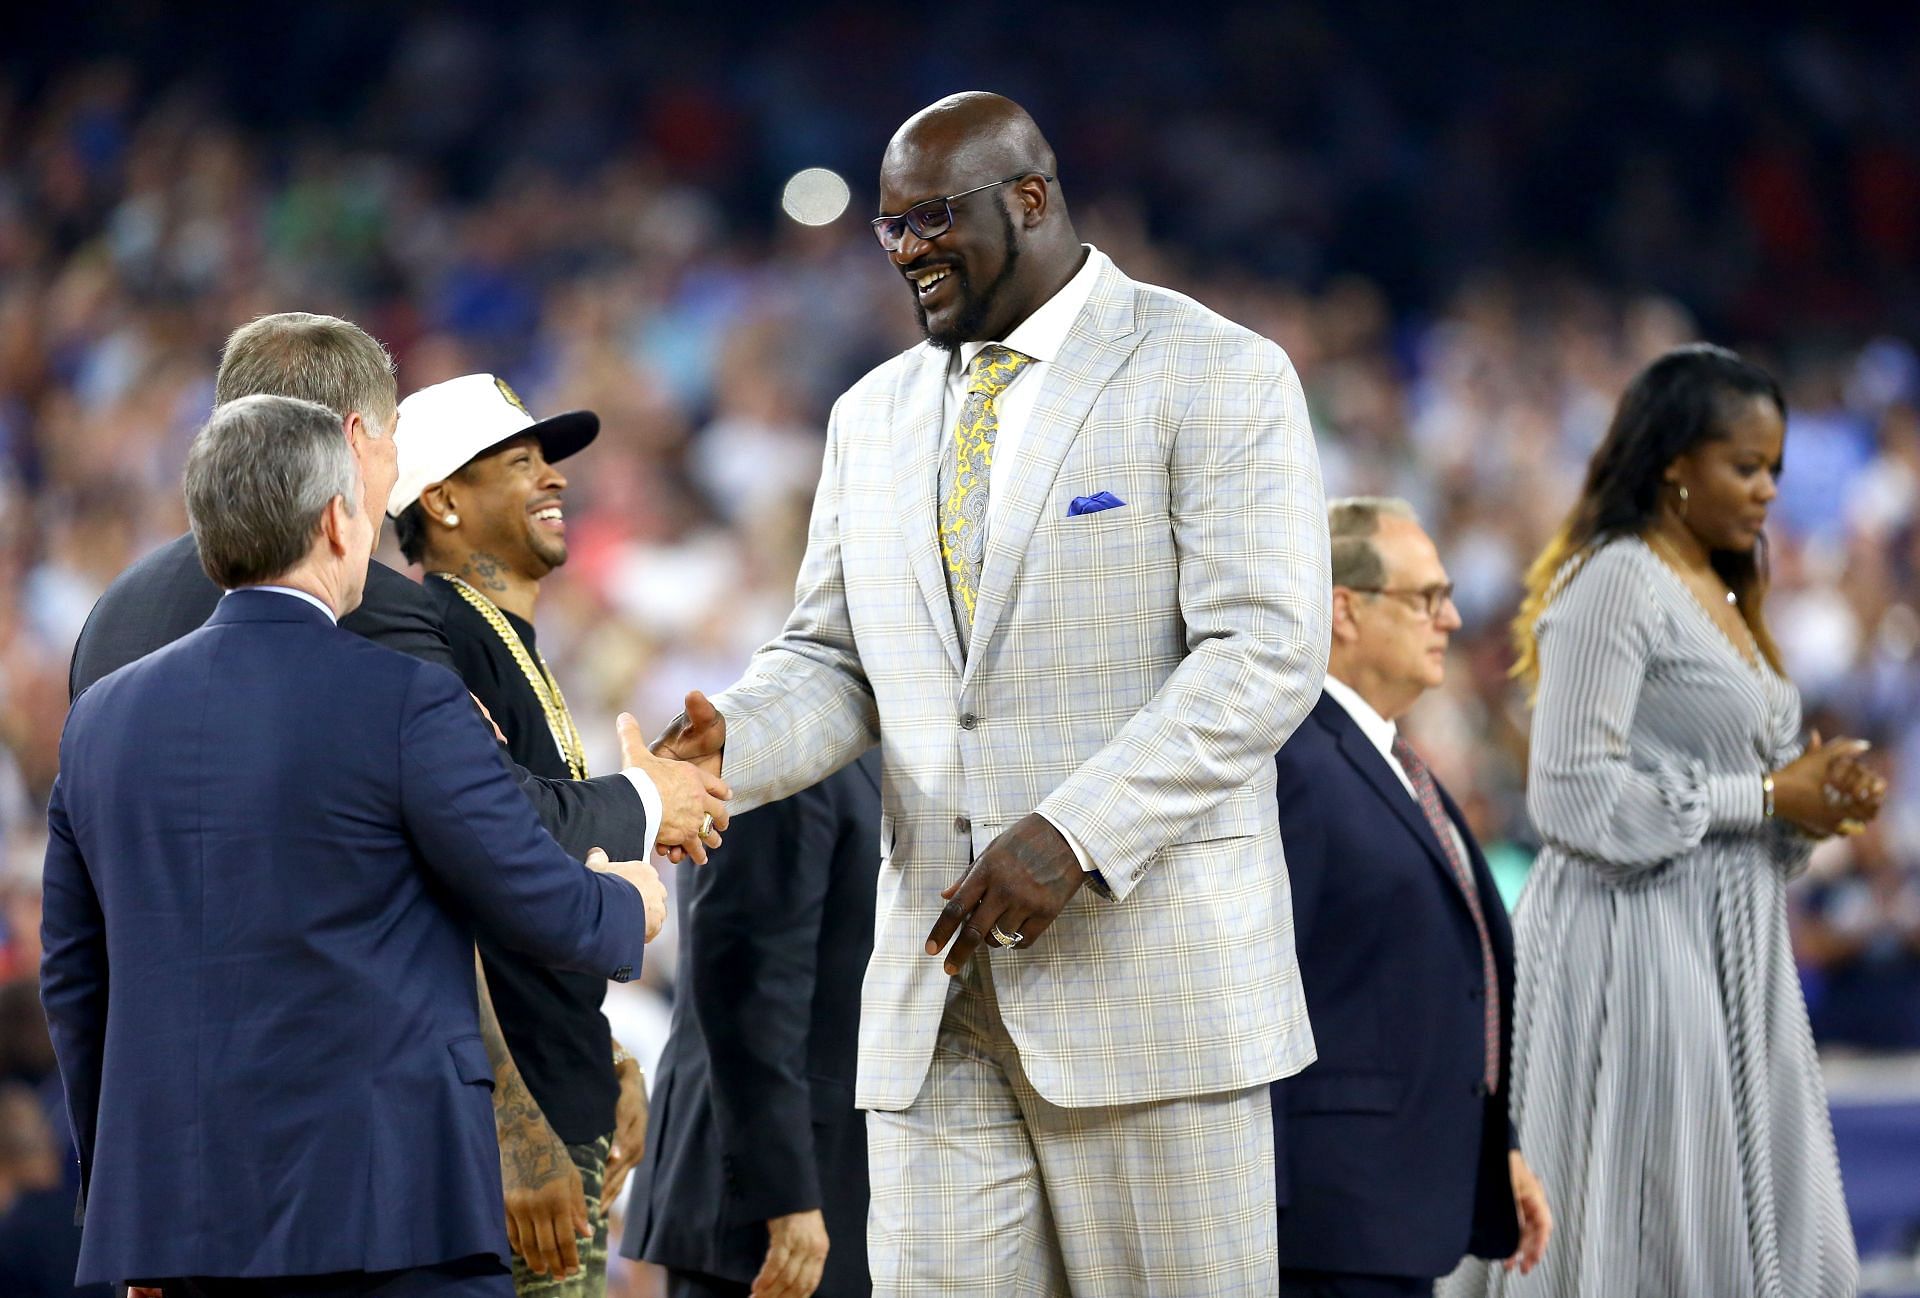 Shaq at the Naismith Memorial Basketball Hall Of Fame 2016 On-Court Class Announcement.